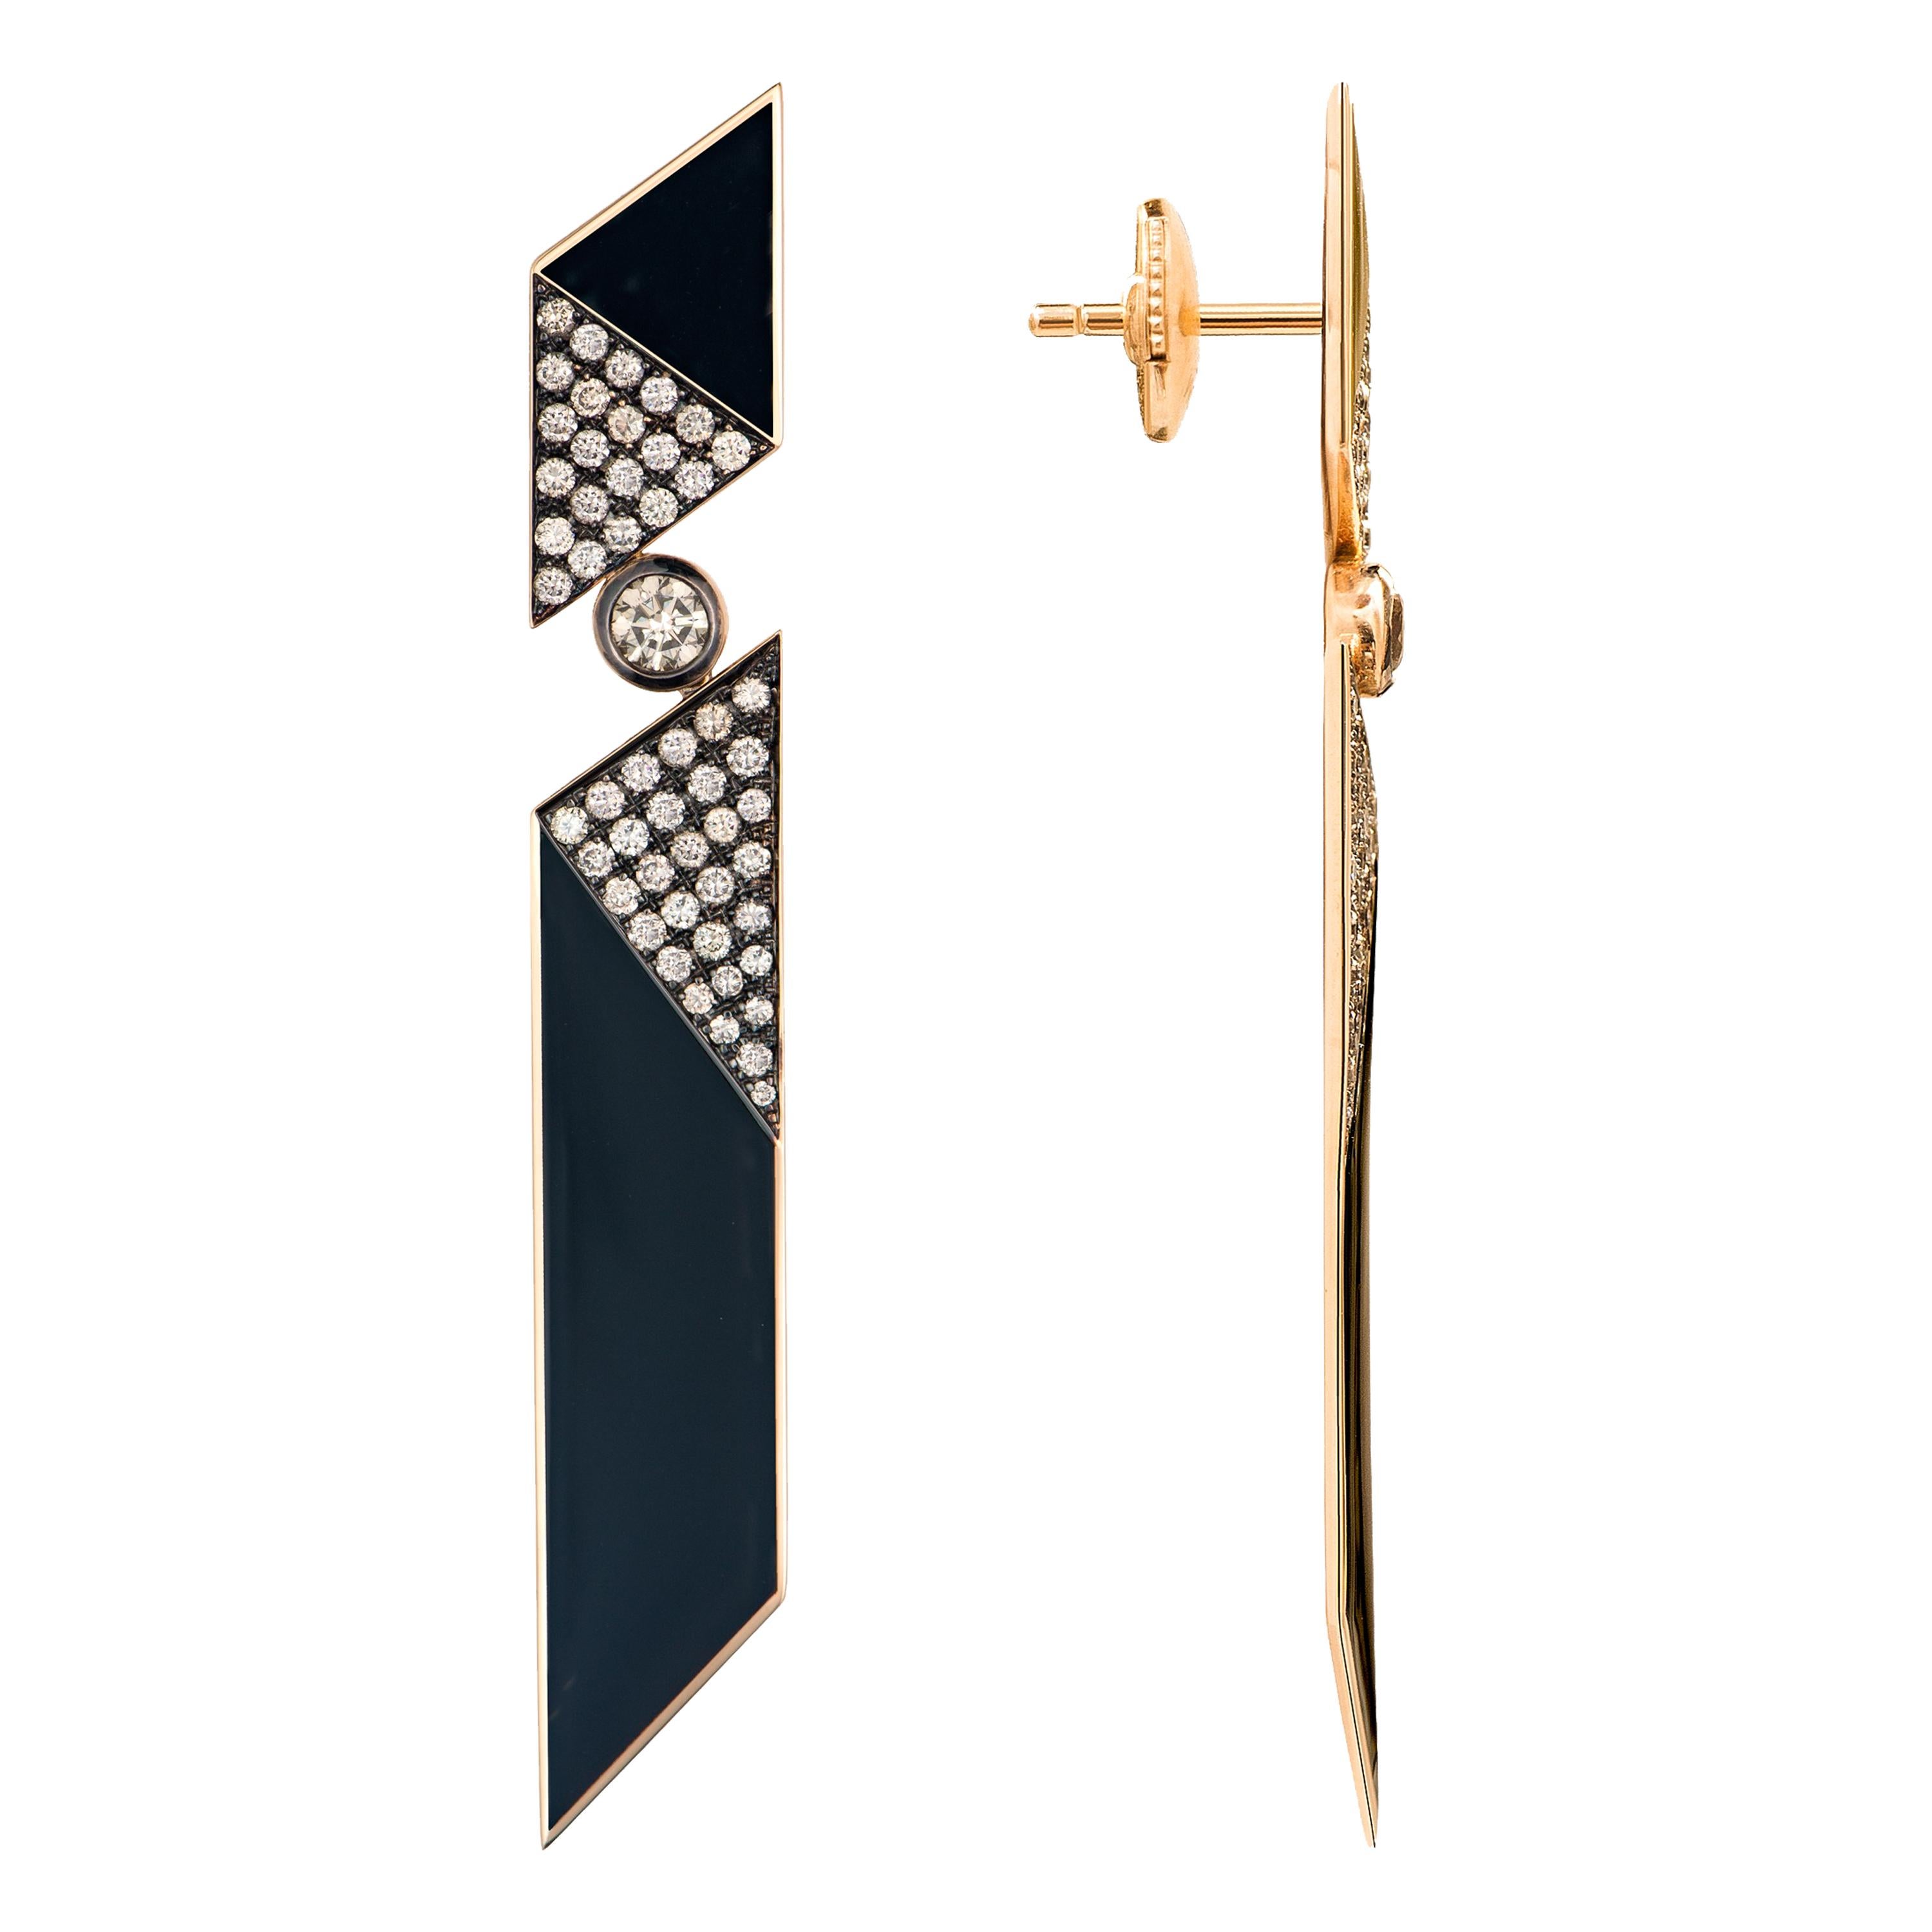 These 18K rose gold earrings belong to Molu Geo collection. They are beautifully handcrafted with sharp edges and a clean outline resulting in a geometrical and precise look. The earrings are set with brown diamonds and are black enamelled with a